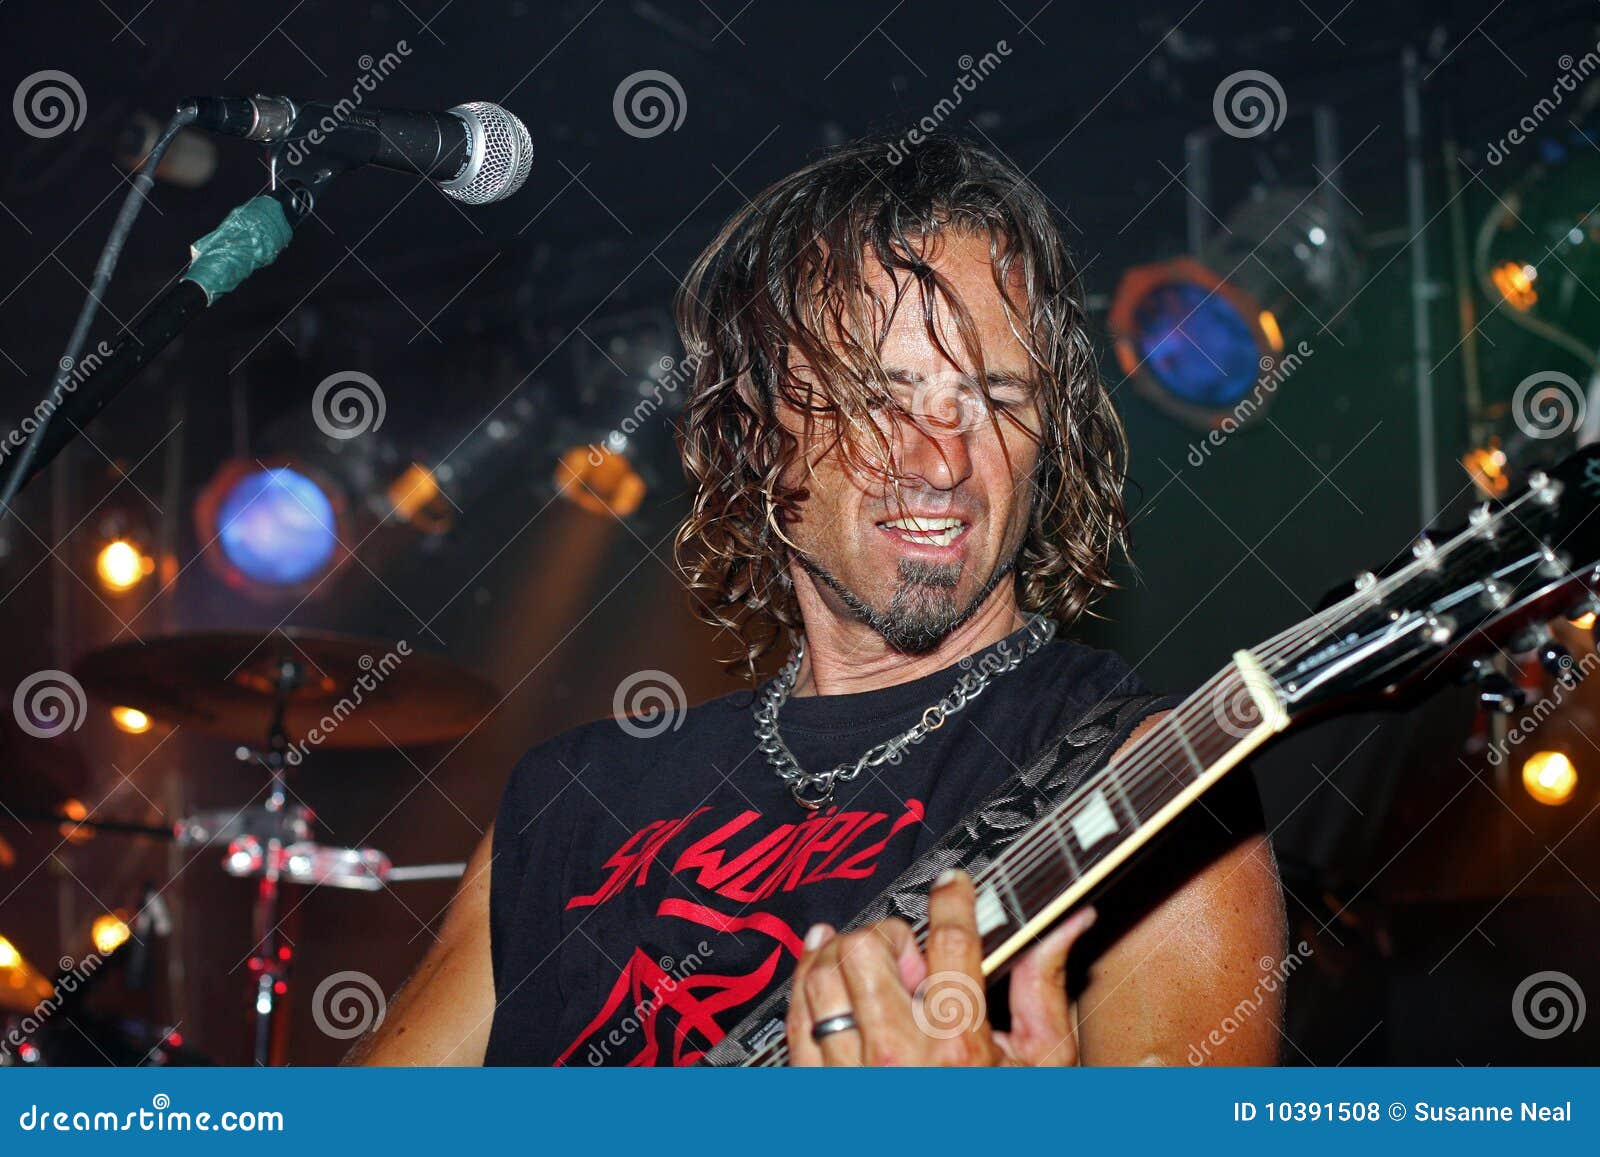 guitarist playing in a band